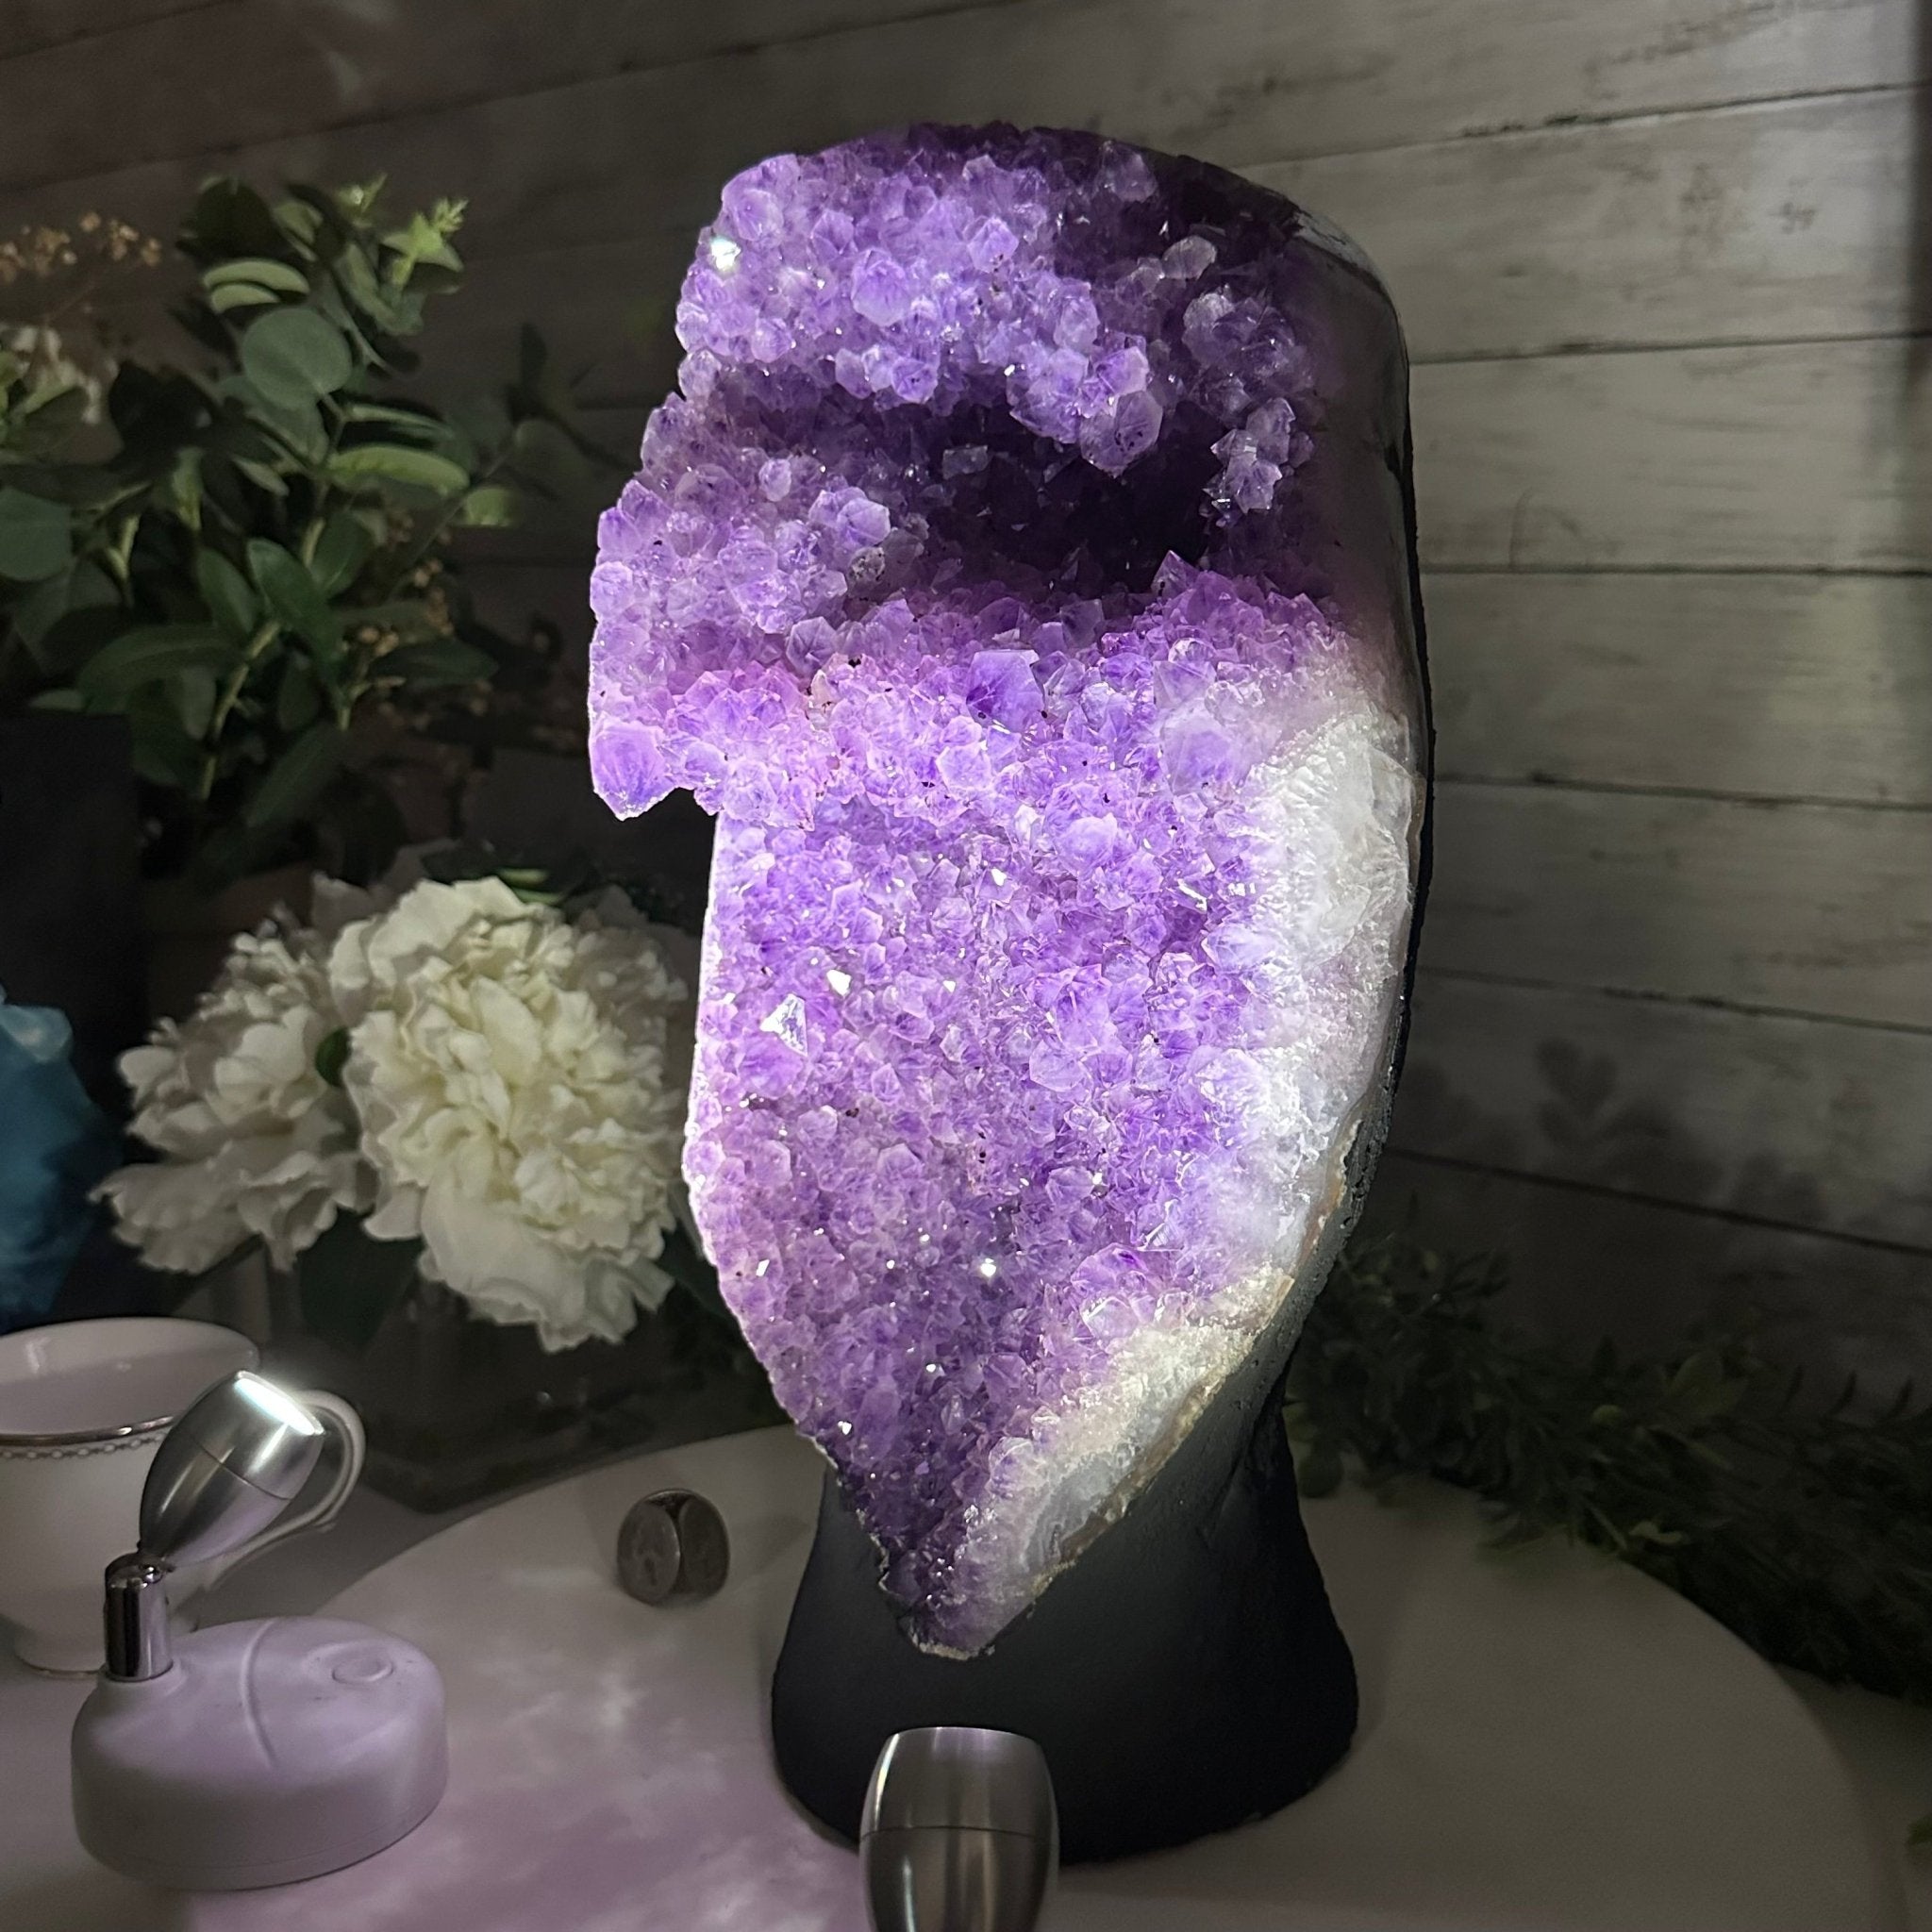 Extra Plus Quality Amethyst Cluster, Cement Base, 13.8" Tall #5614-0116 - Brazil GemsBrazil GemsExtra Plus Quality Amethyst Cluster, Cement Base, 13.8" Tall #5614-0116Clusters on Cement Bases5614-0116